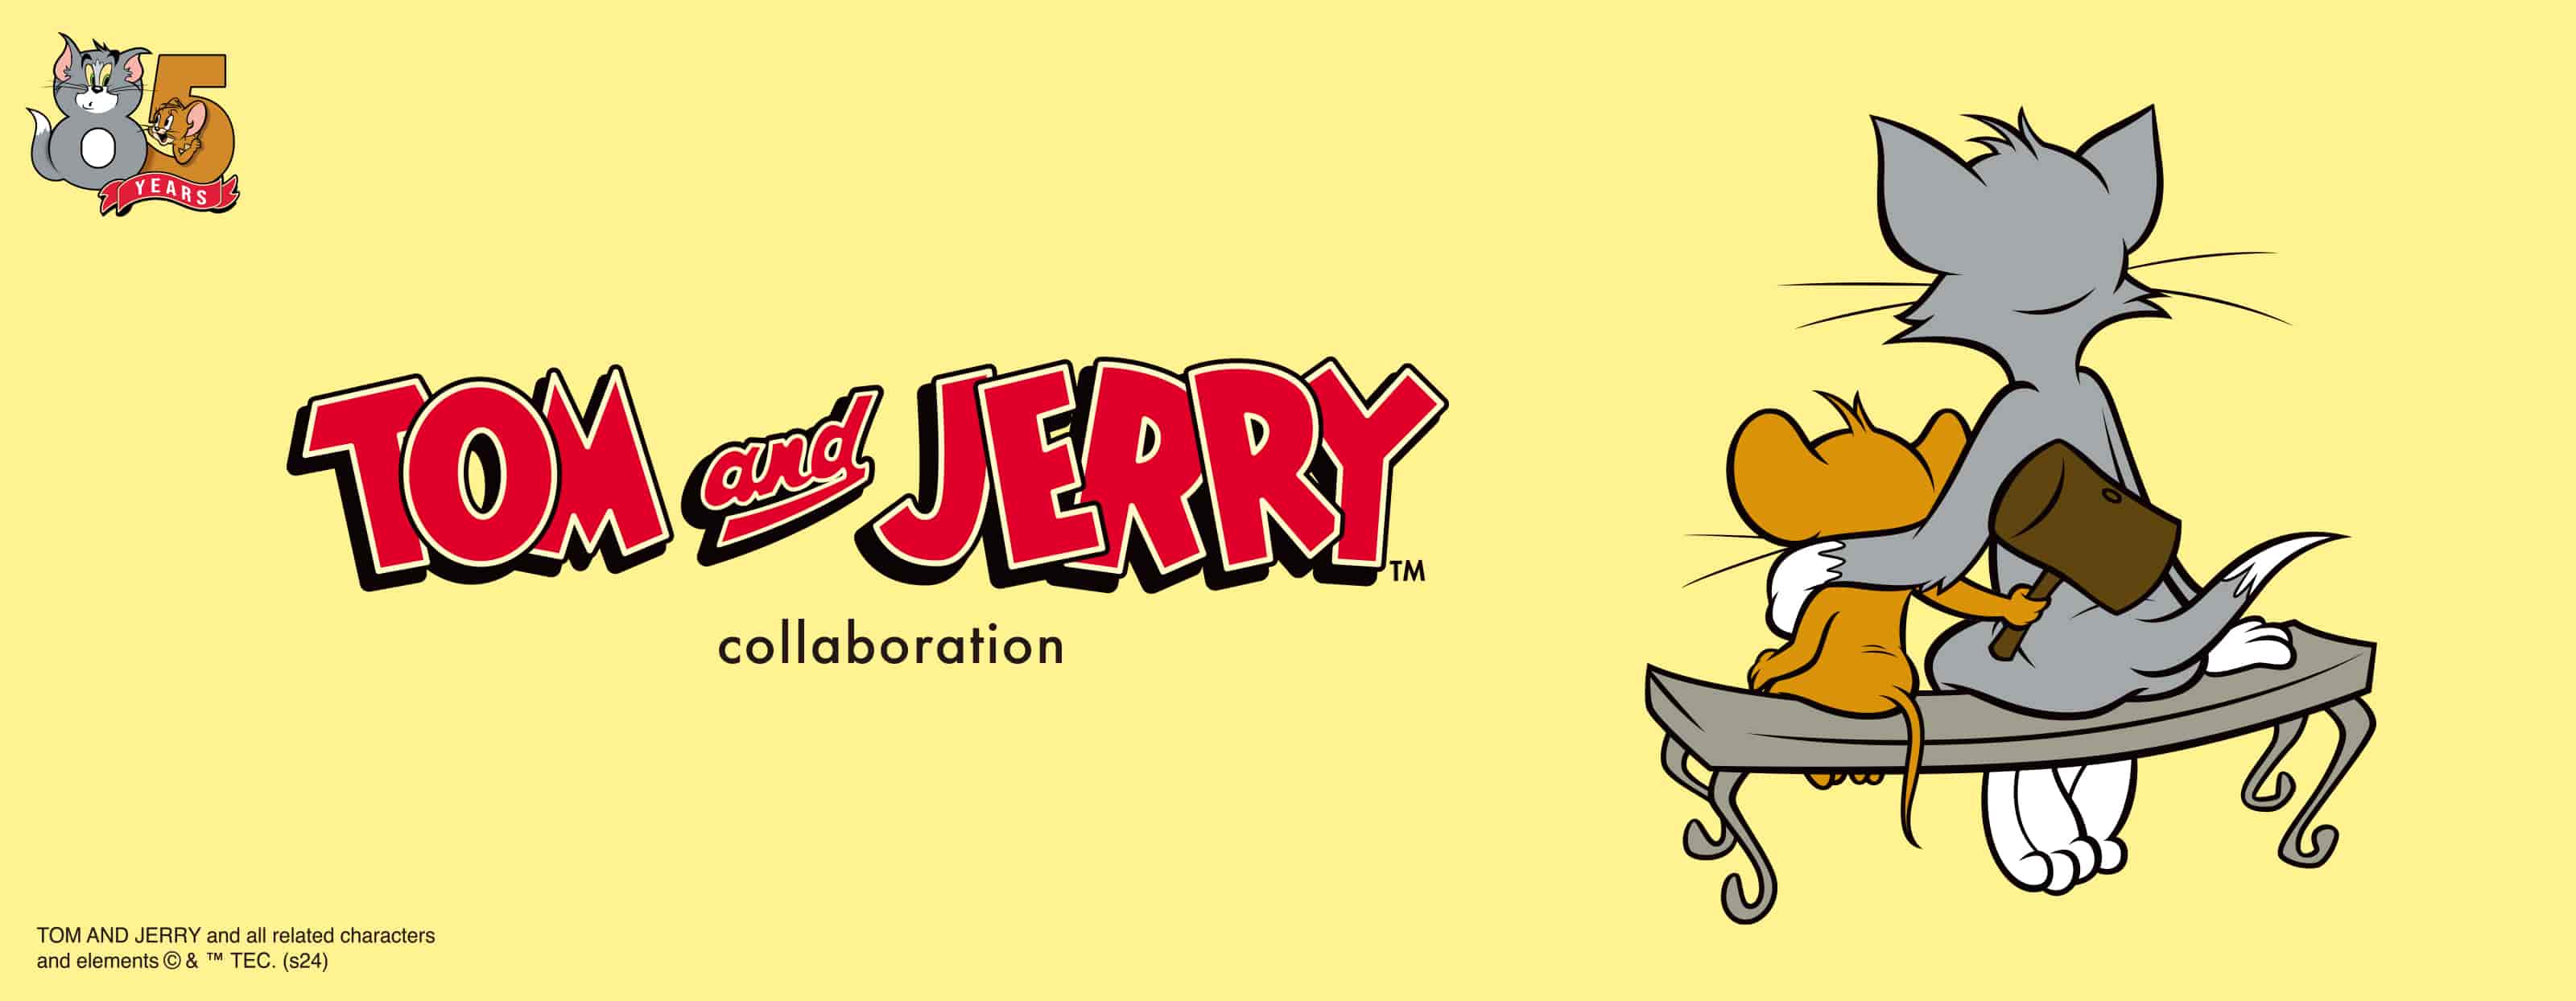 One of the greatest and most beloved duos in cartoon history, we are happy to present a series featuring the legendary cat and mouse comedy of "Tom and Jerry"!  From their beginning in the animated shorts created by William Hannah and Joseph Barbera in 1940, they are now beloved all over the world.[ssorder:-20240326]